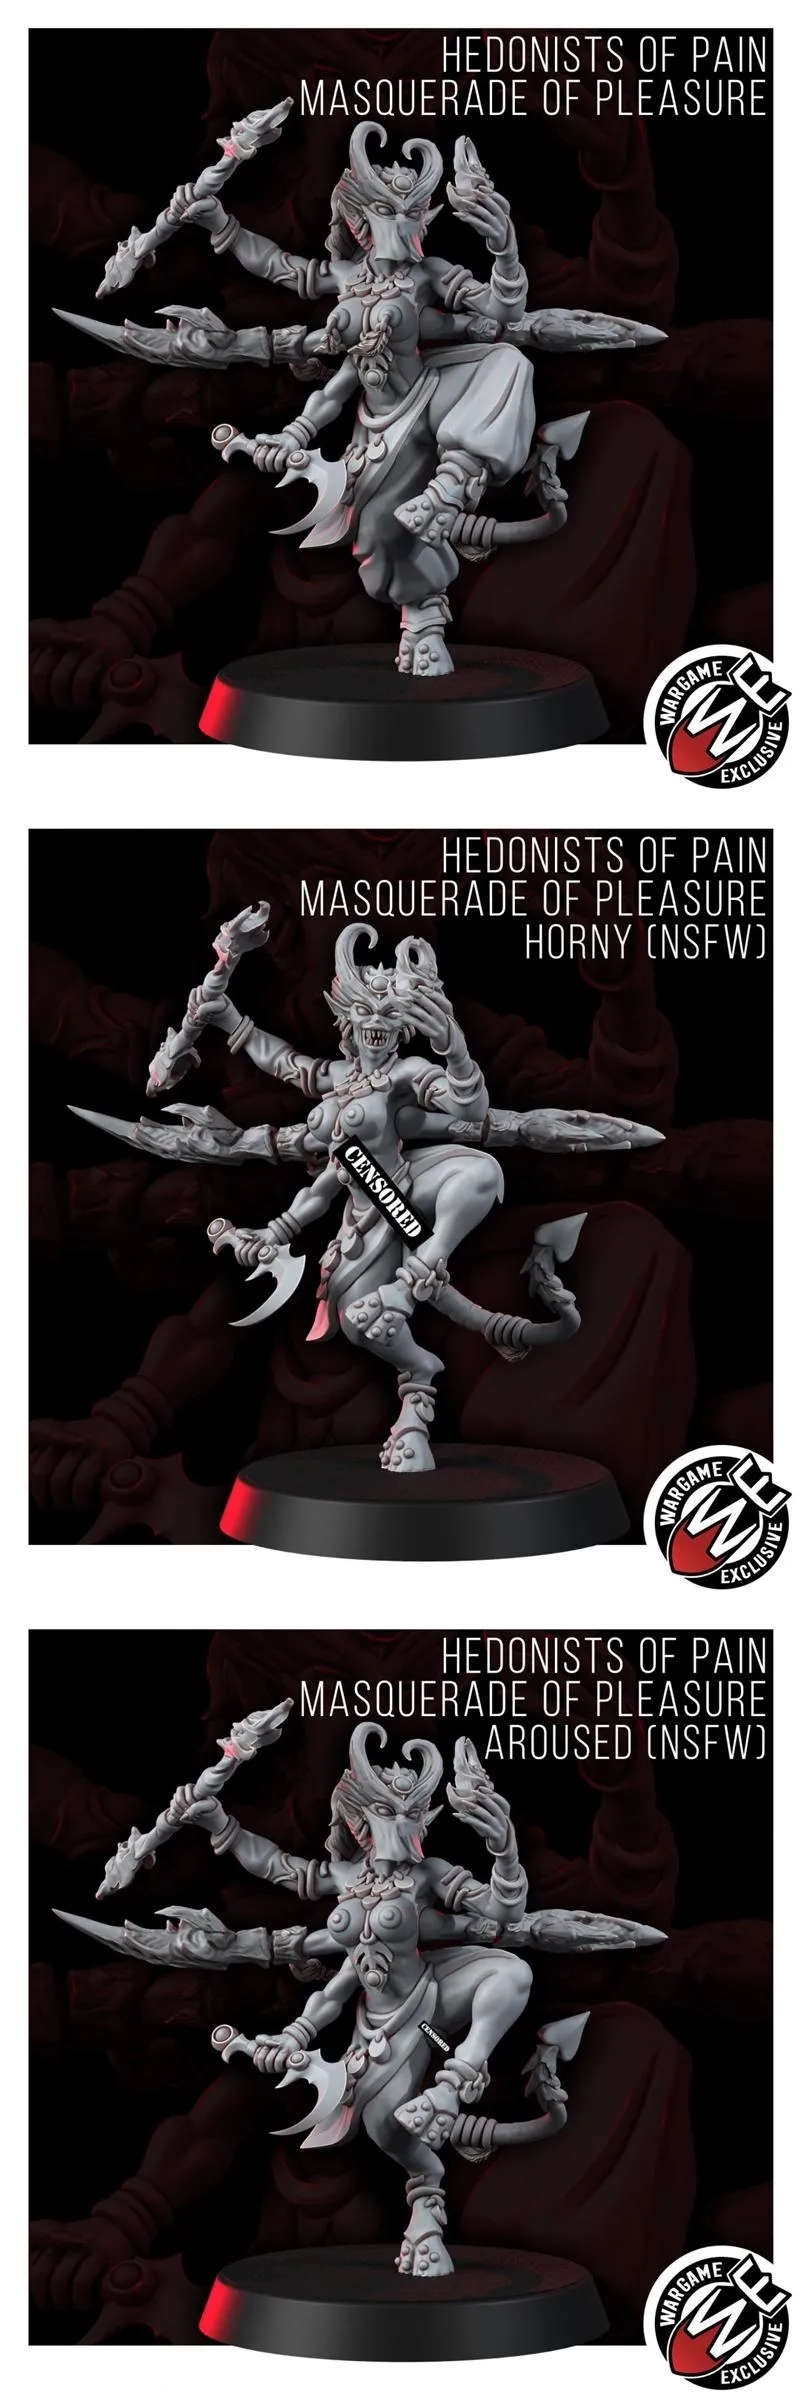 Hedonists Of Pain Masquerade Of Pleasure and Aroused and Horny